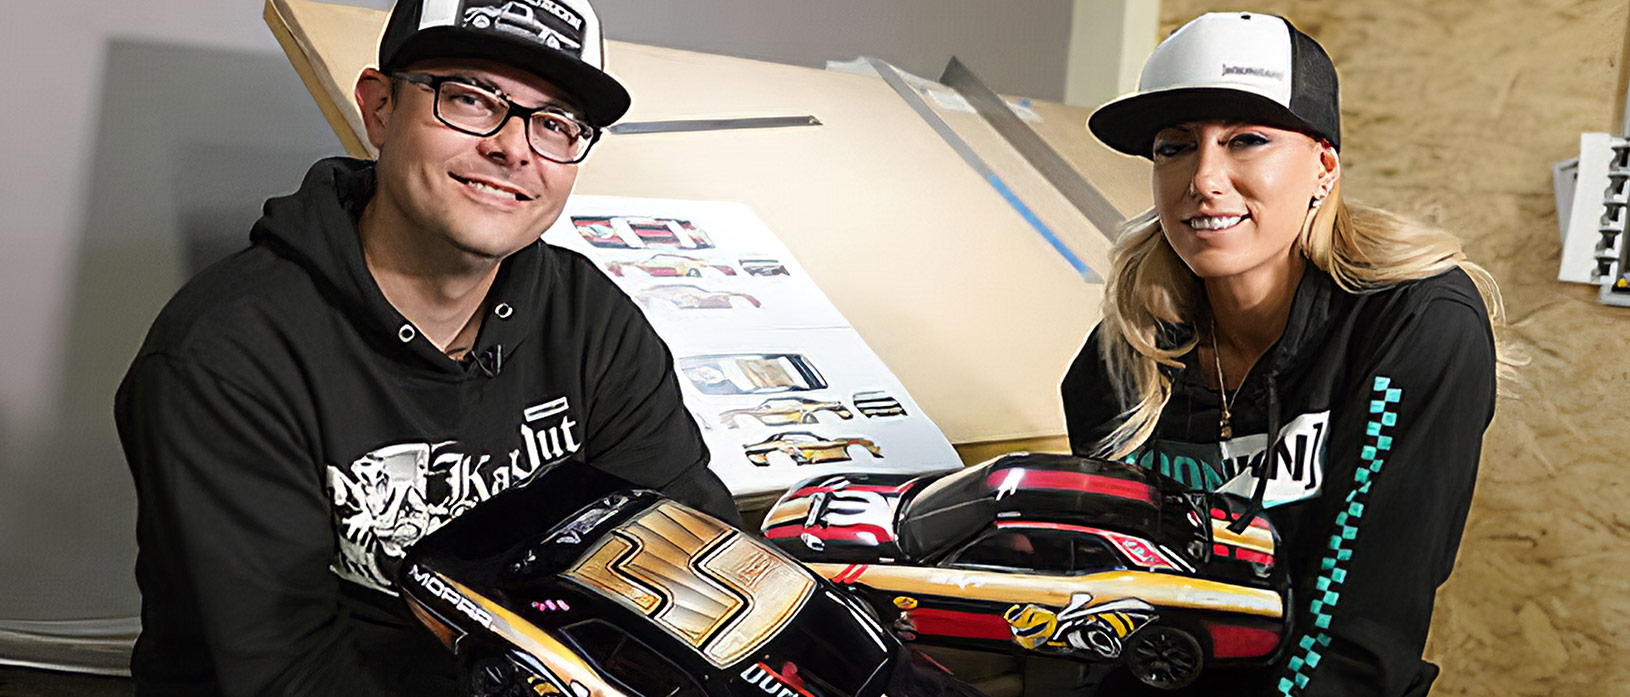 Hoonigan and Leah Pritchett showing off 2 livery options for Leah's Drag Pak